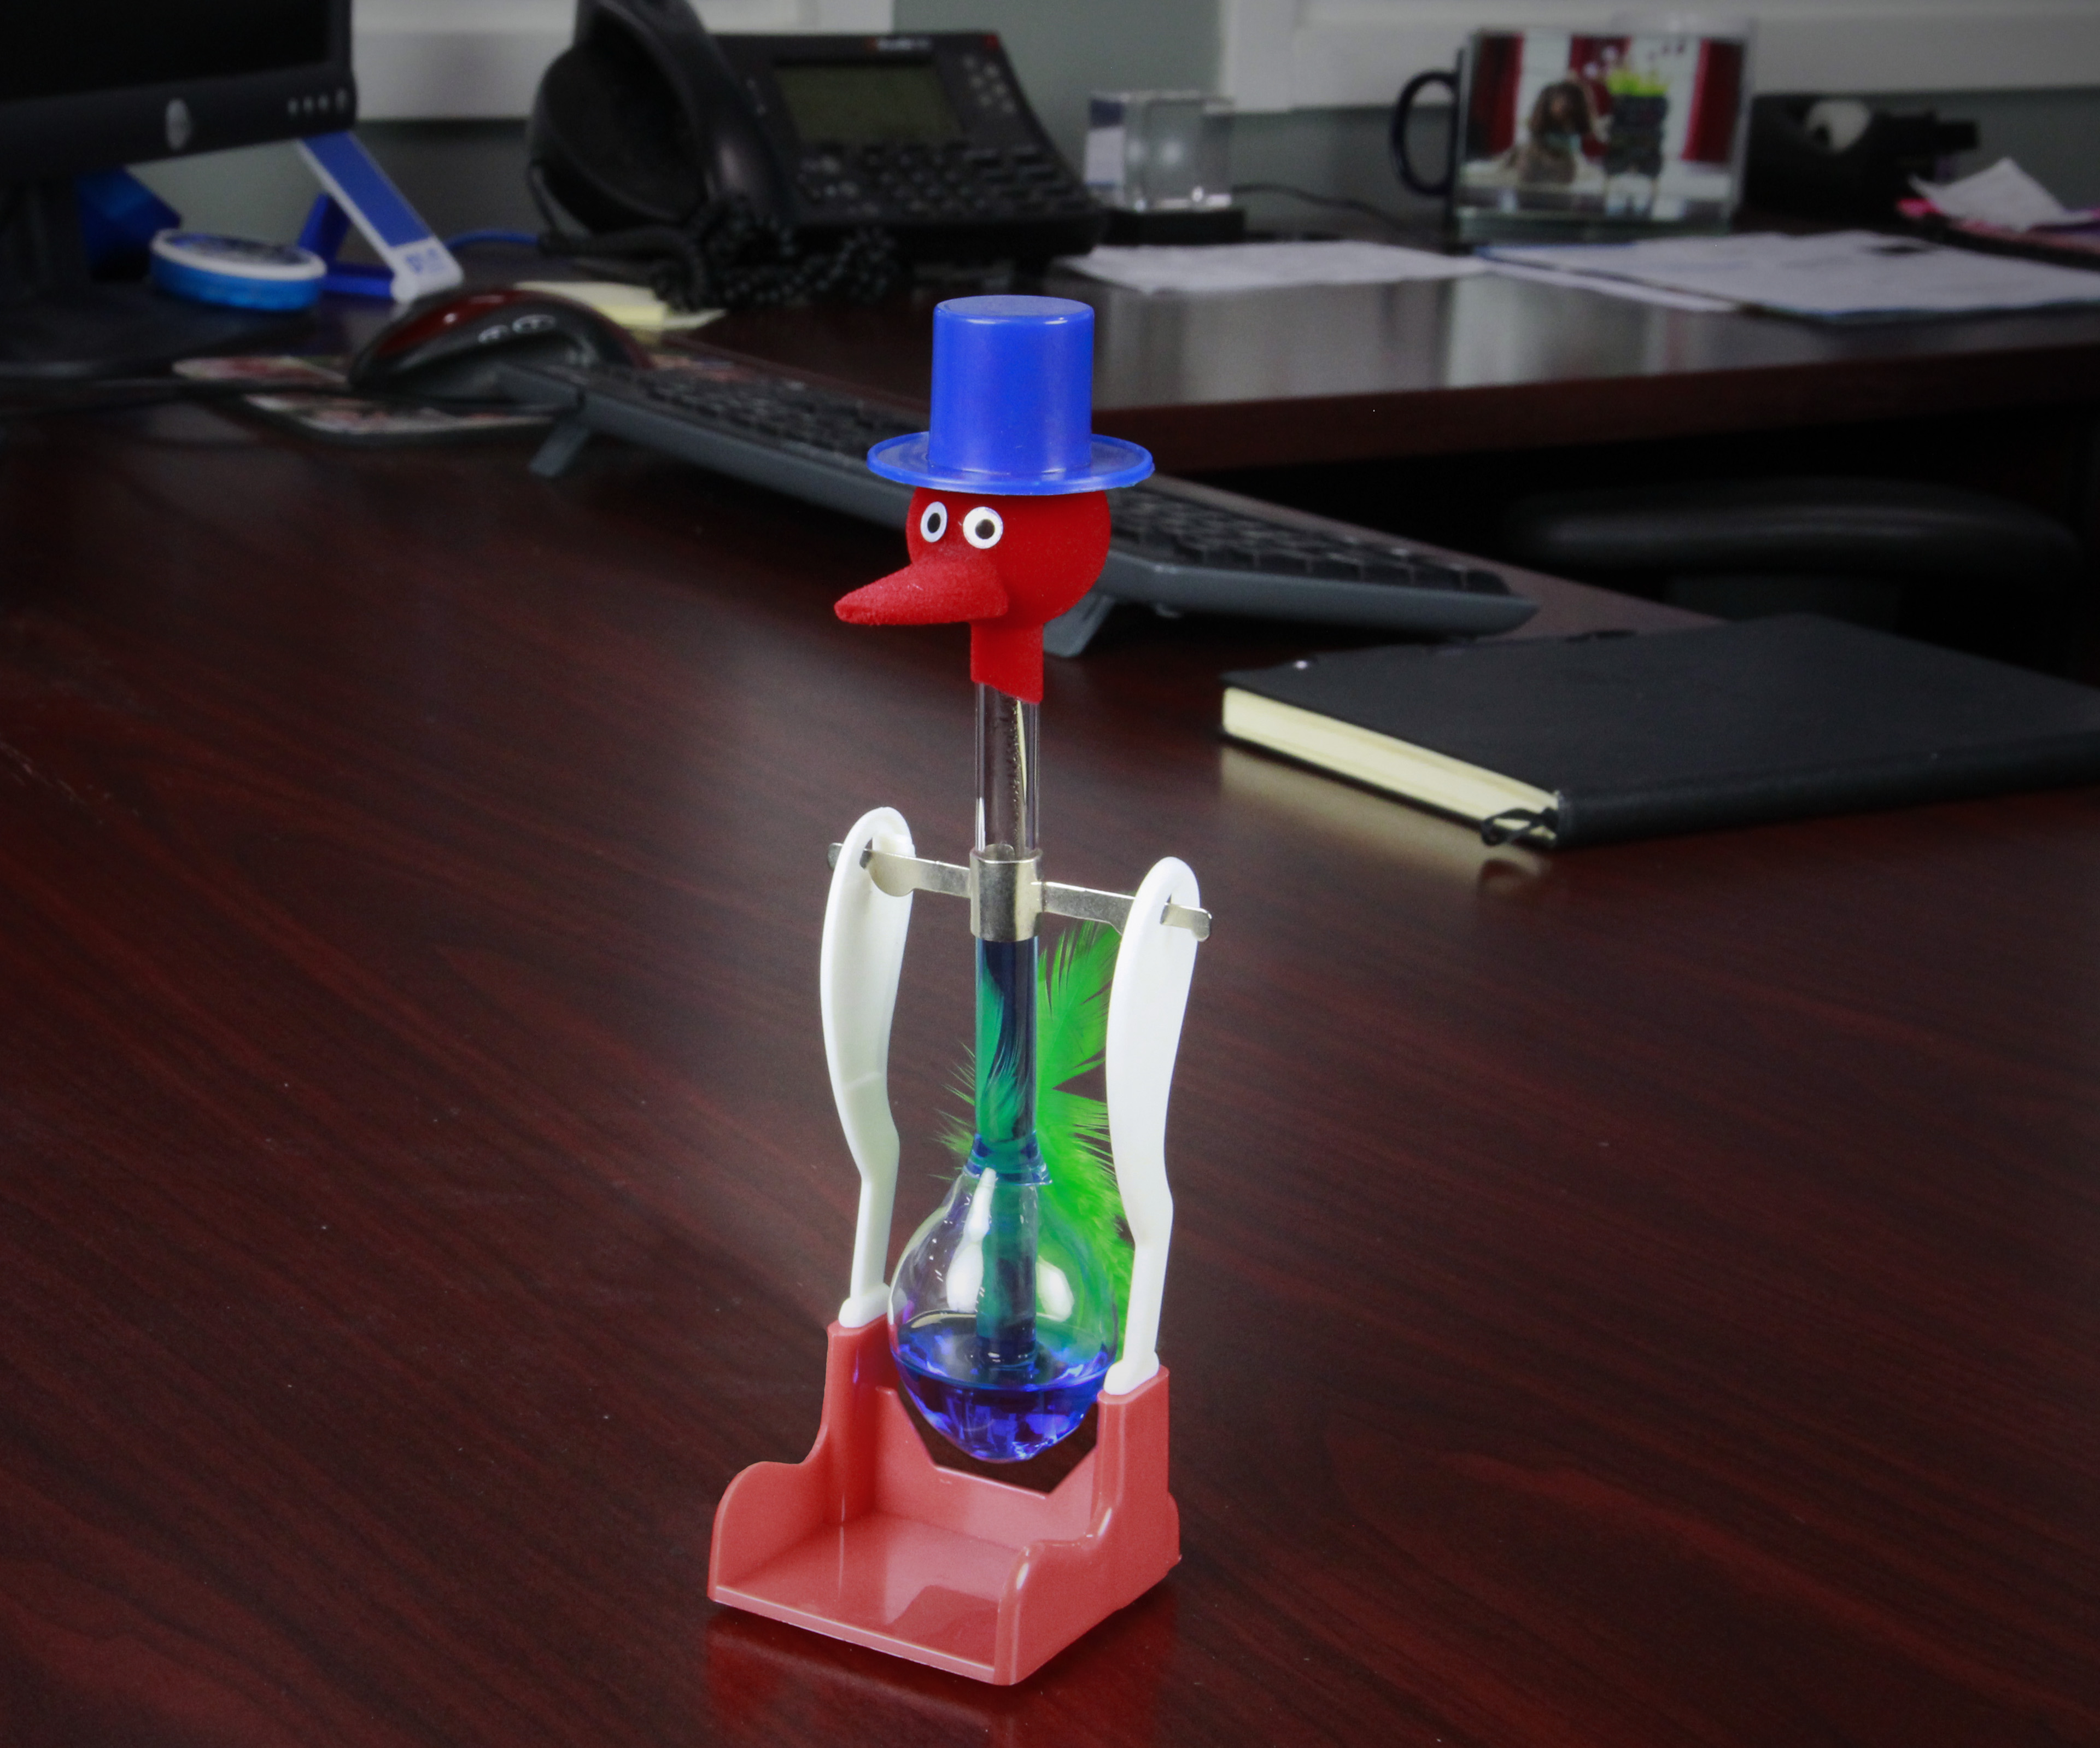 Check Out This Amazing Science Toy - Drinking Bird 